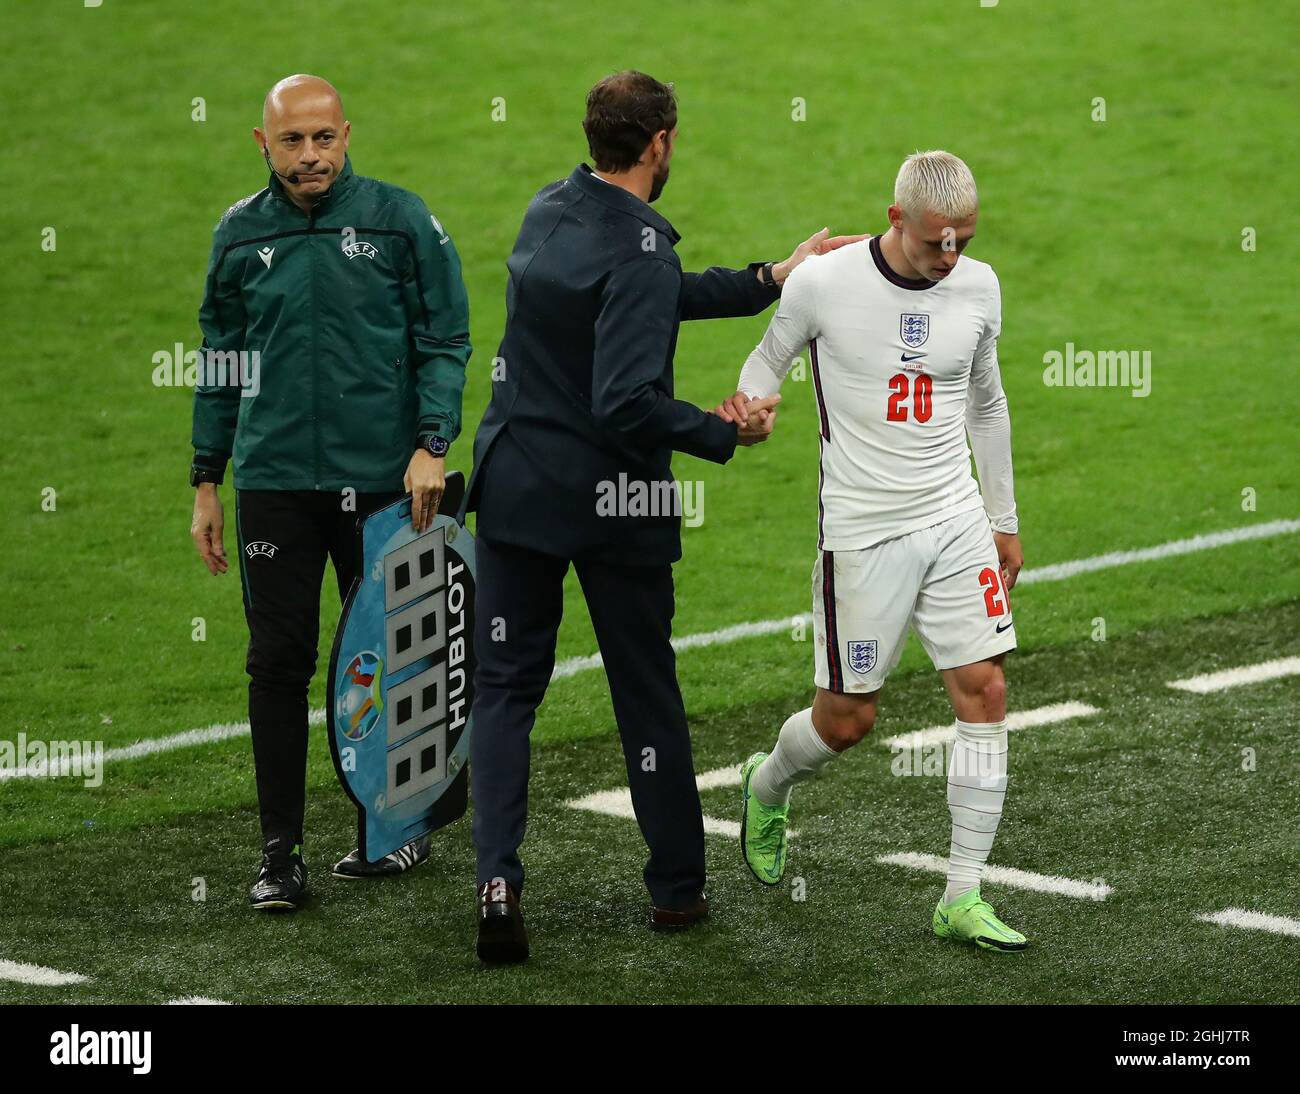 London, England, 18th June 2021. Gareth Southgate manager of England consoles Phil Foden of England as he substitutes him  during the UEFA European Championships match at Wembley Stadium, London. Picture credit should read: David Klein / Sportimage via PA Images Stock Photo